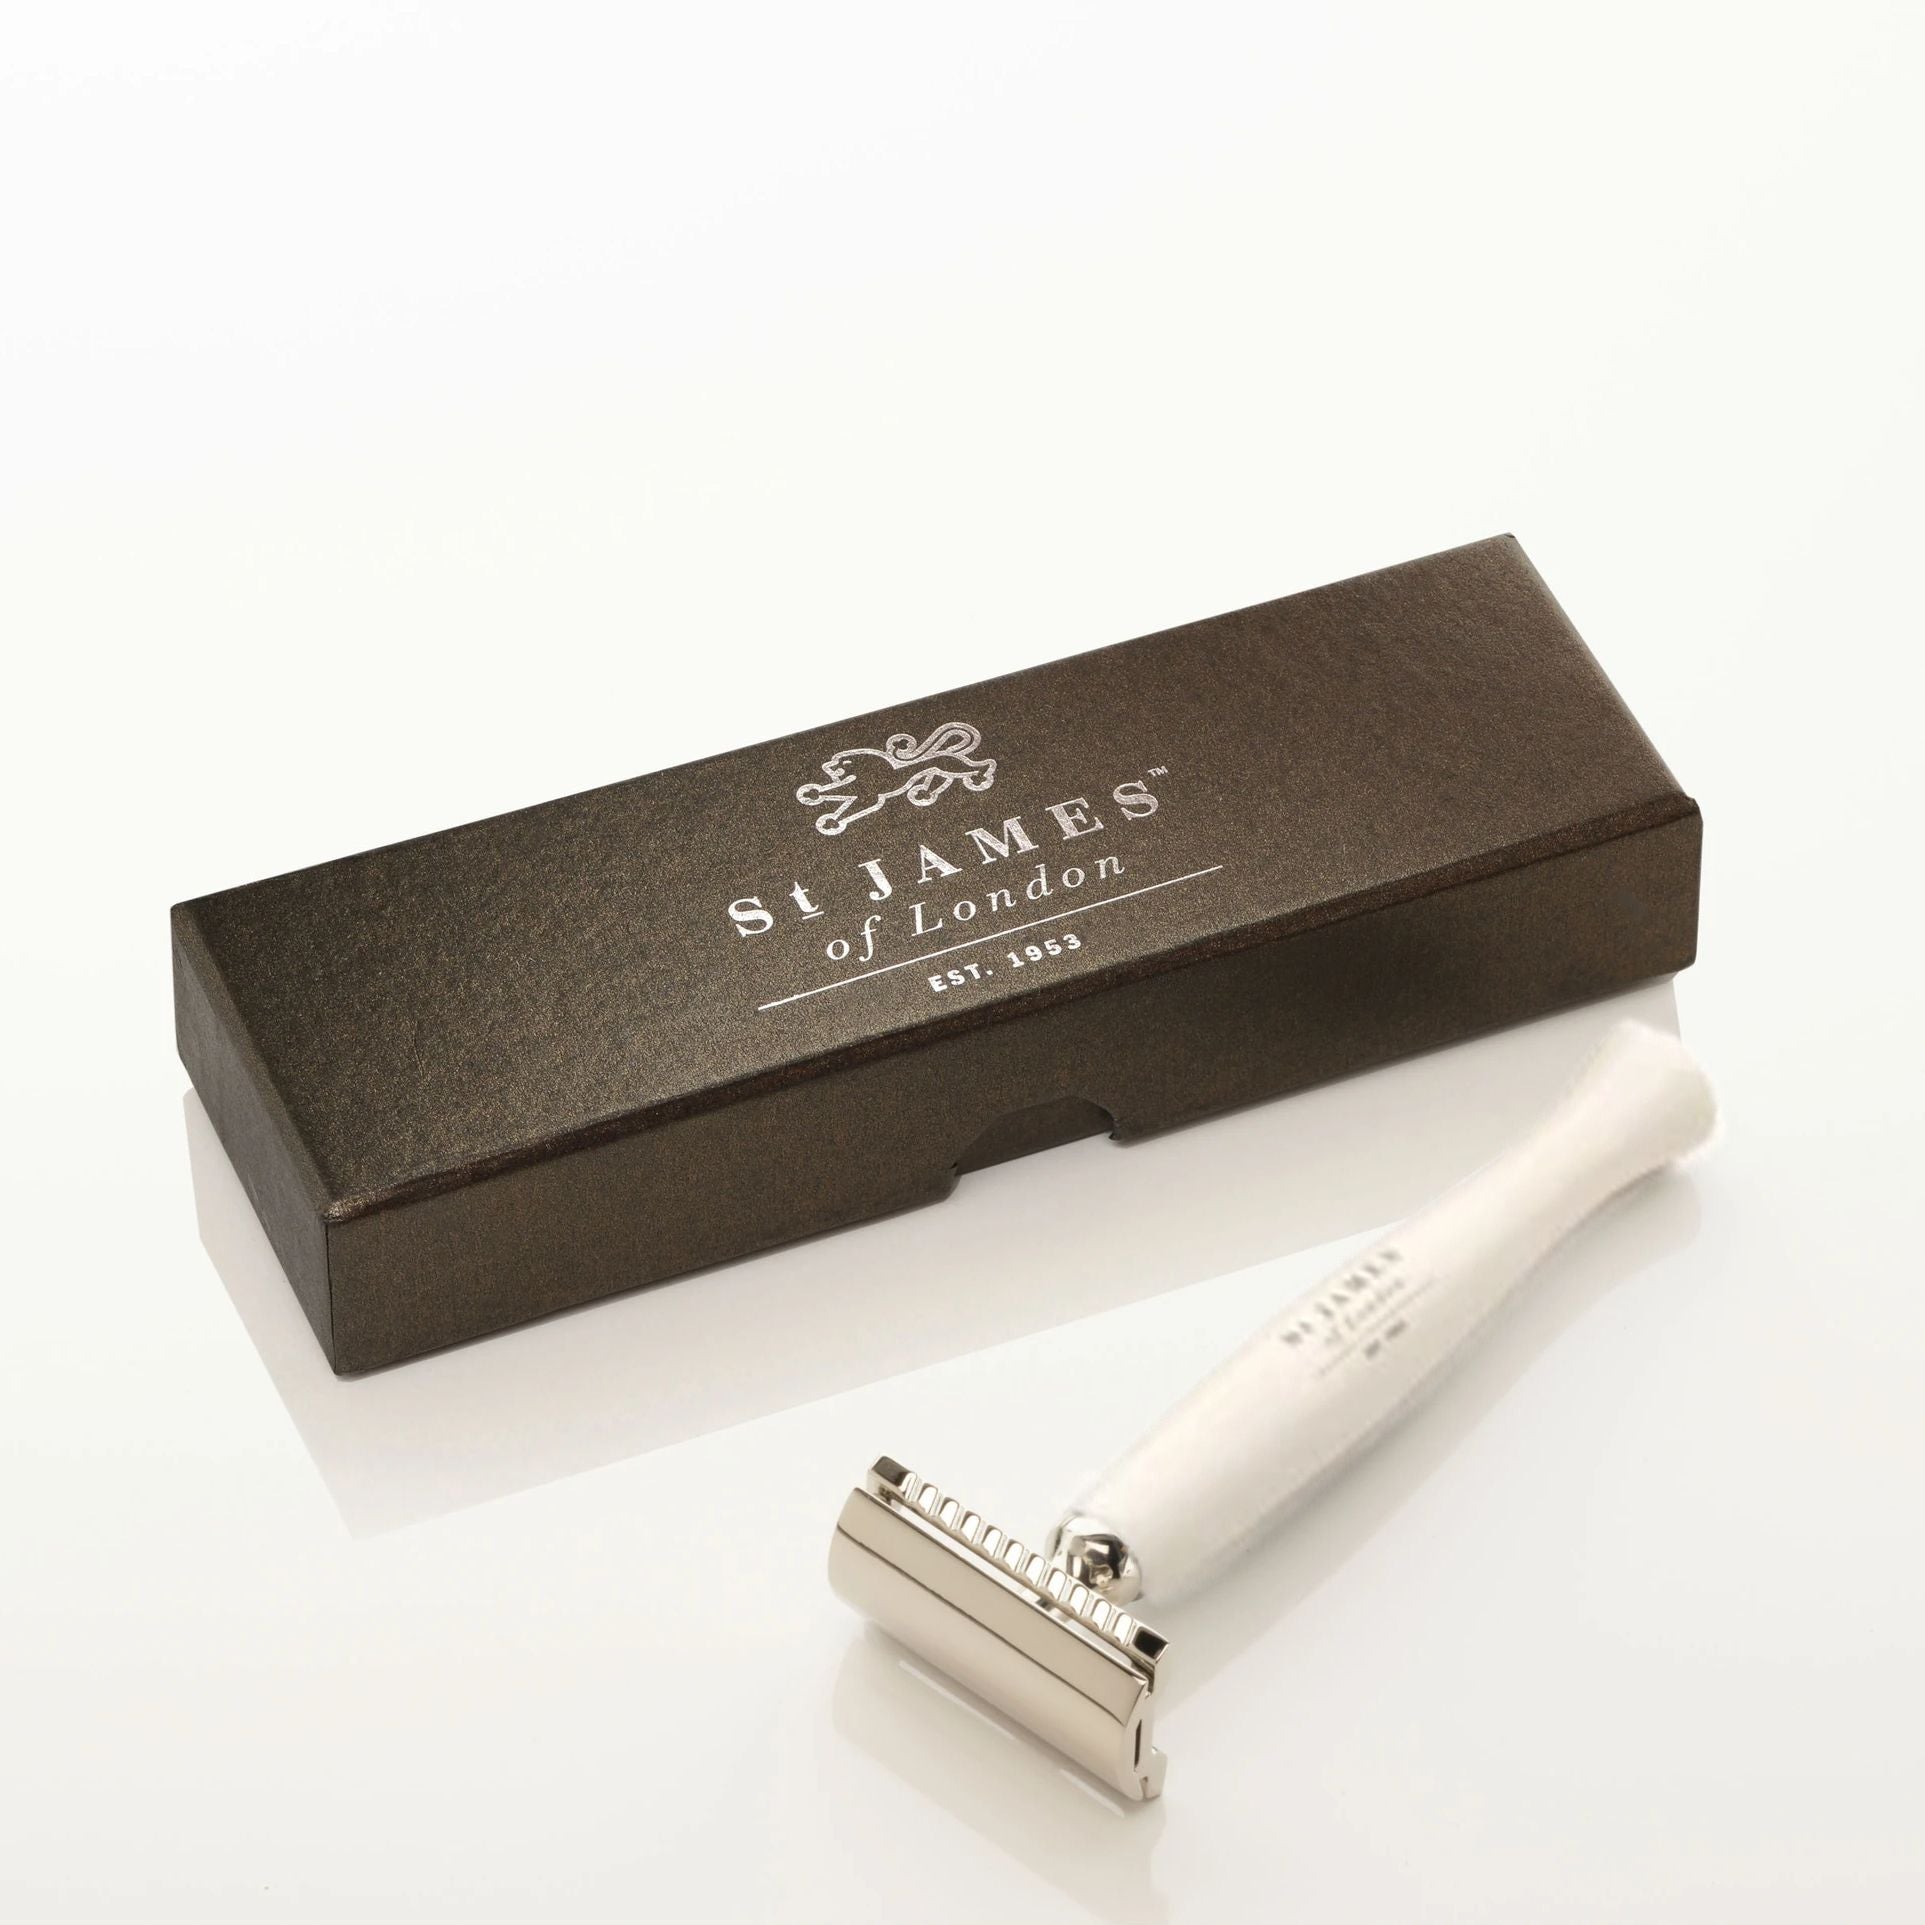 "Cheeky B'stard" Handcrafted Safety Razor in Ivory by St. James of London